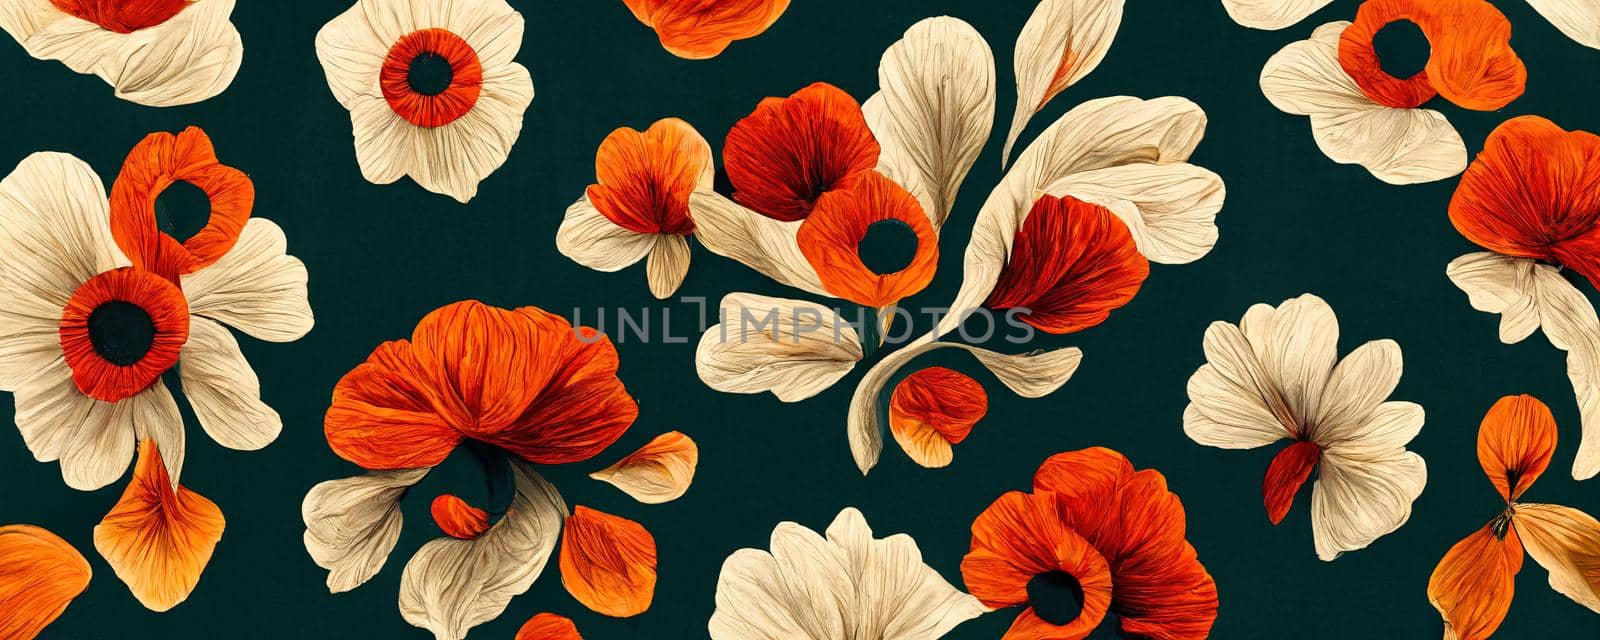 abstract pattern on the fabric in the form of flowers in warm shades of red, green and cream by TRMK